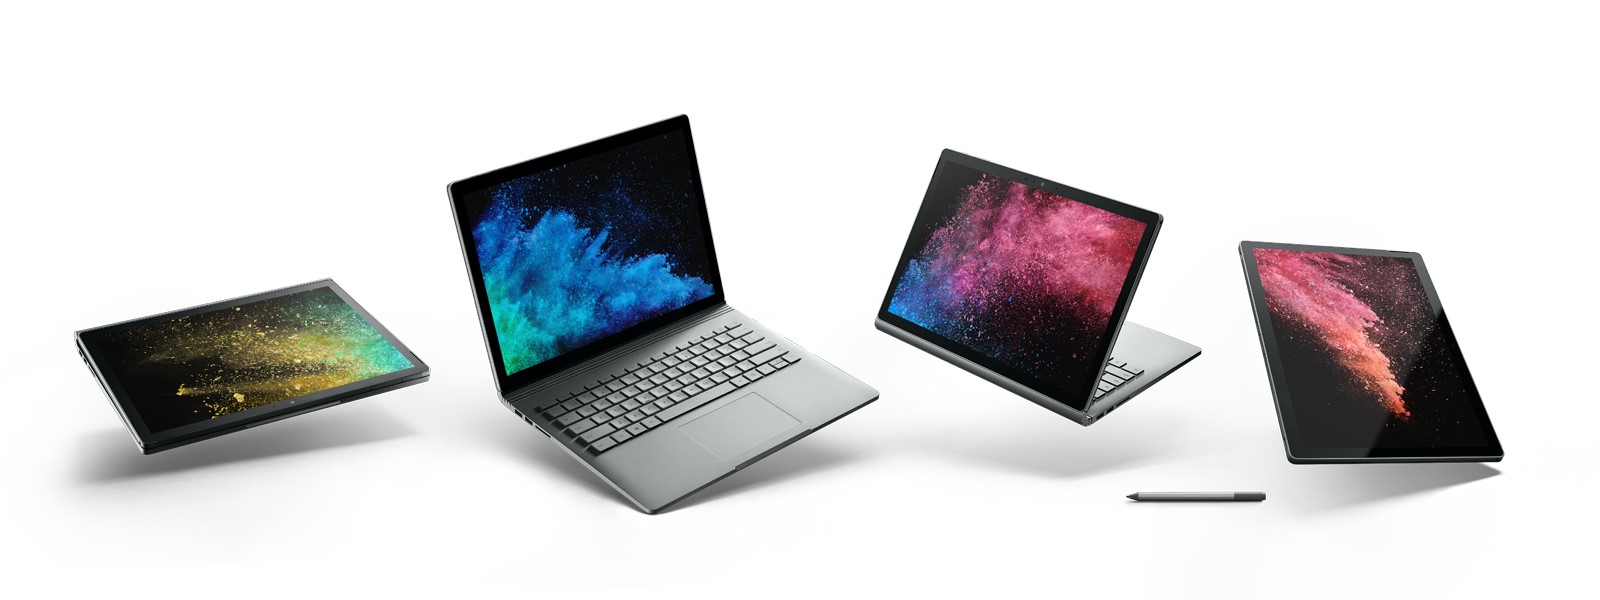 Microsoft Surface Book 2 | The Most Powerful Surface Ever, Price, specs